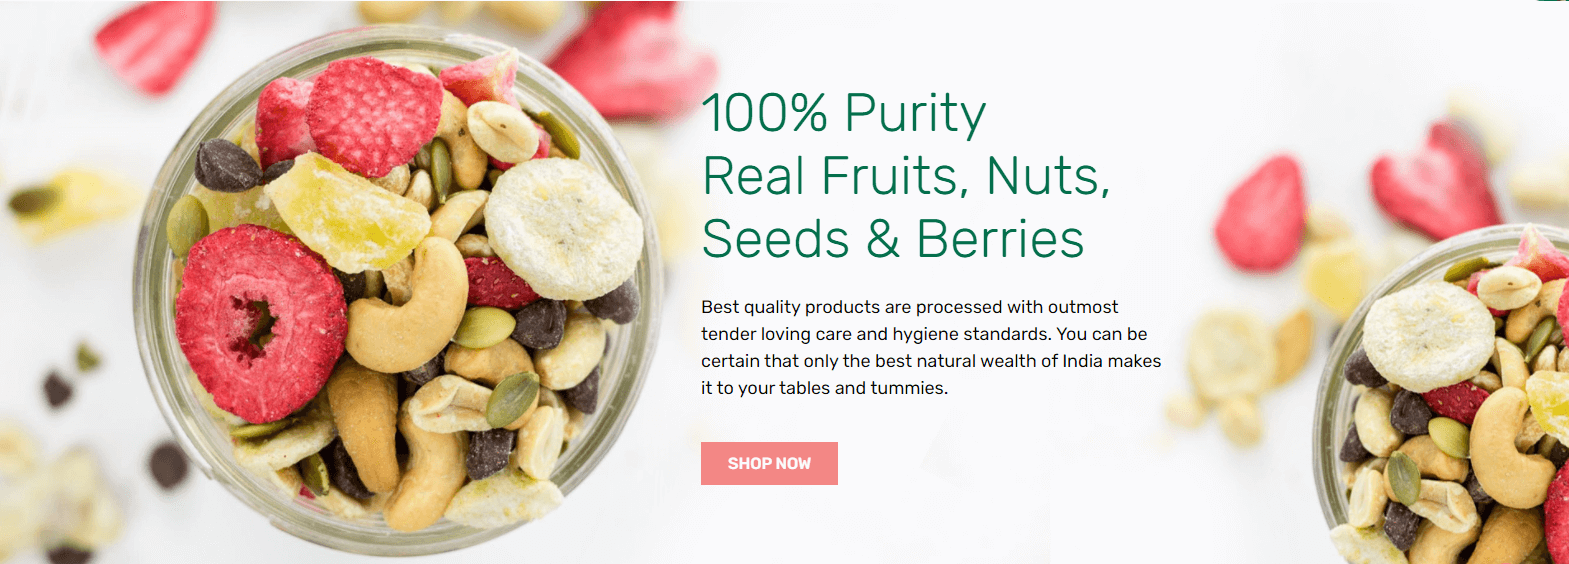 Dehydrated Fruits Website 